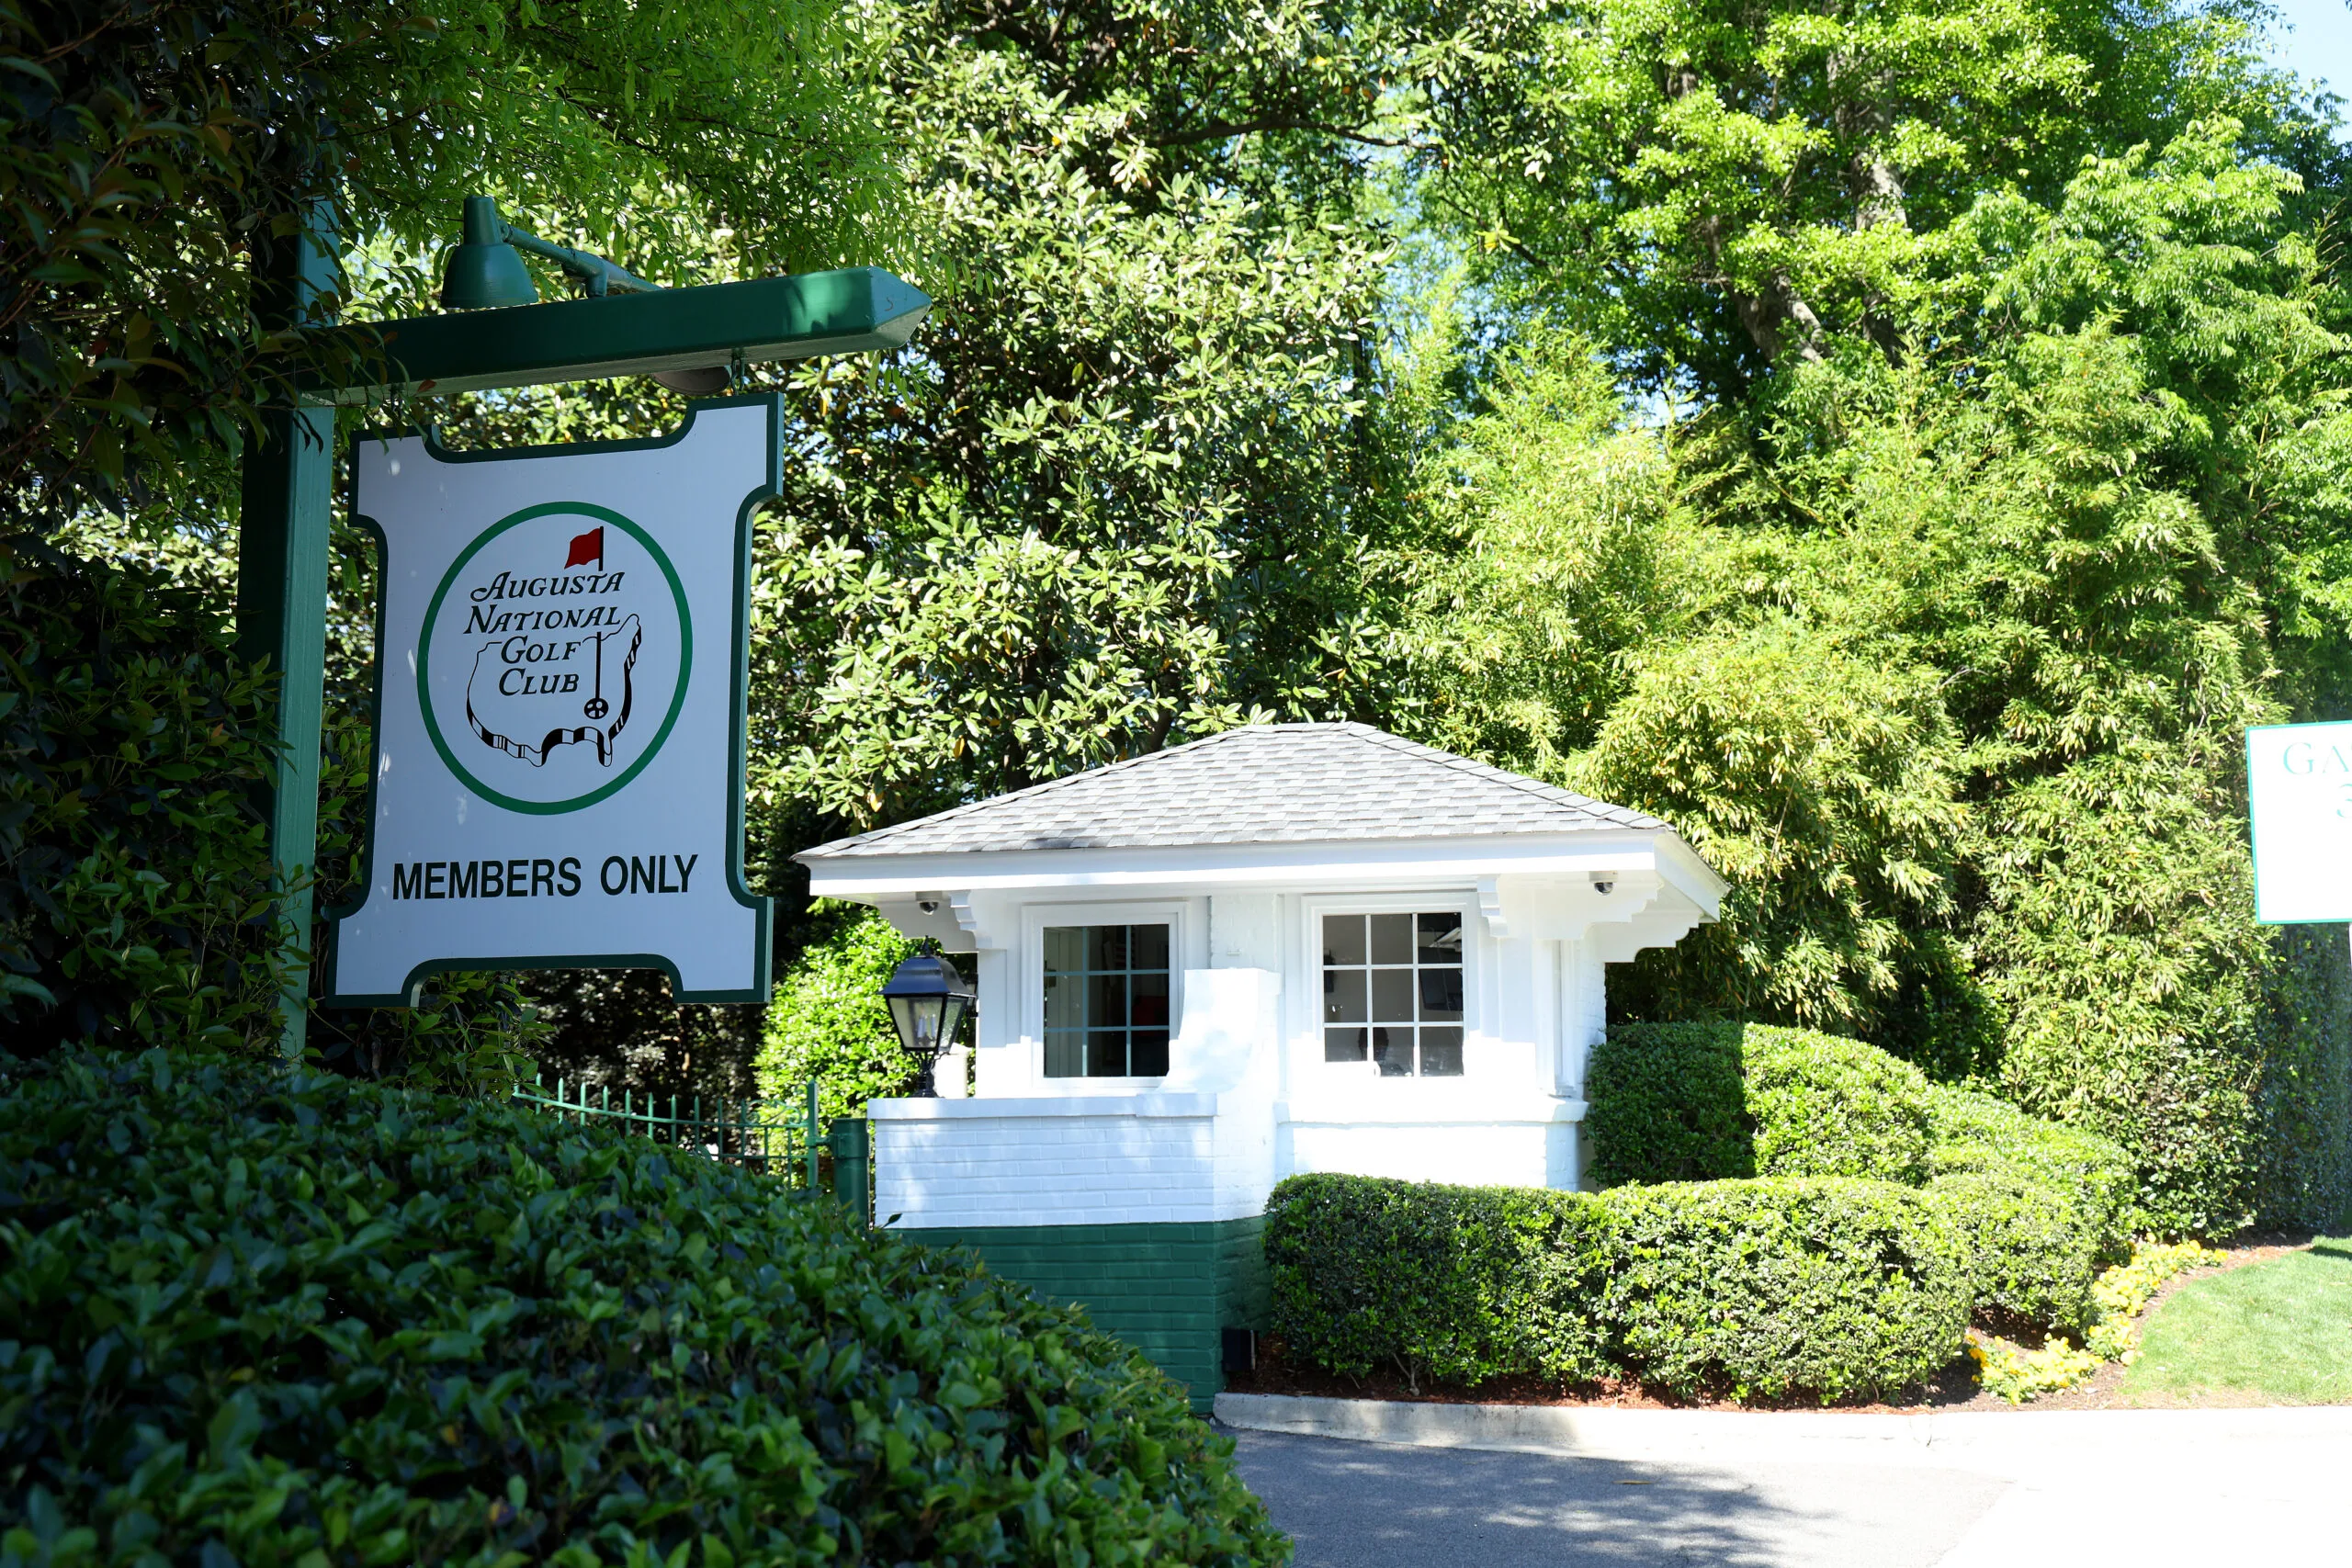 AUGUSTA, GEORGIA - APRIL 02: A general view of the entrance to Augusta National Golf Club prior to the 2023 Masters Tournament at Augusta National Golf Club on April 02, 2023 in Augusta, Georgia. (Photo by Andrew Redington/Getty Images)